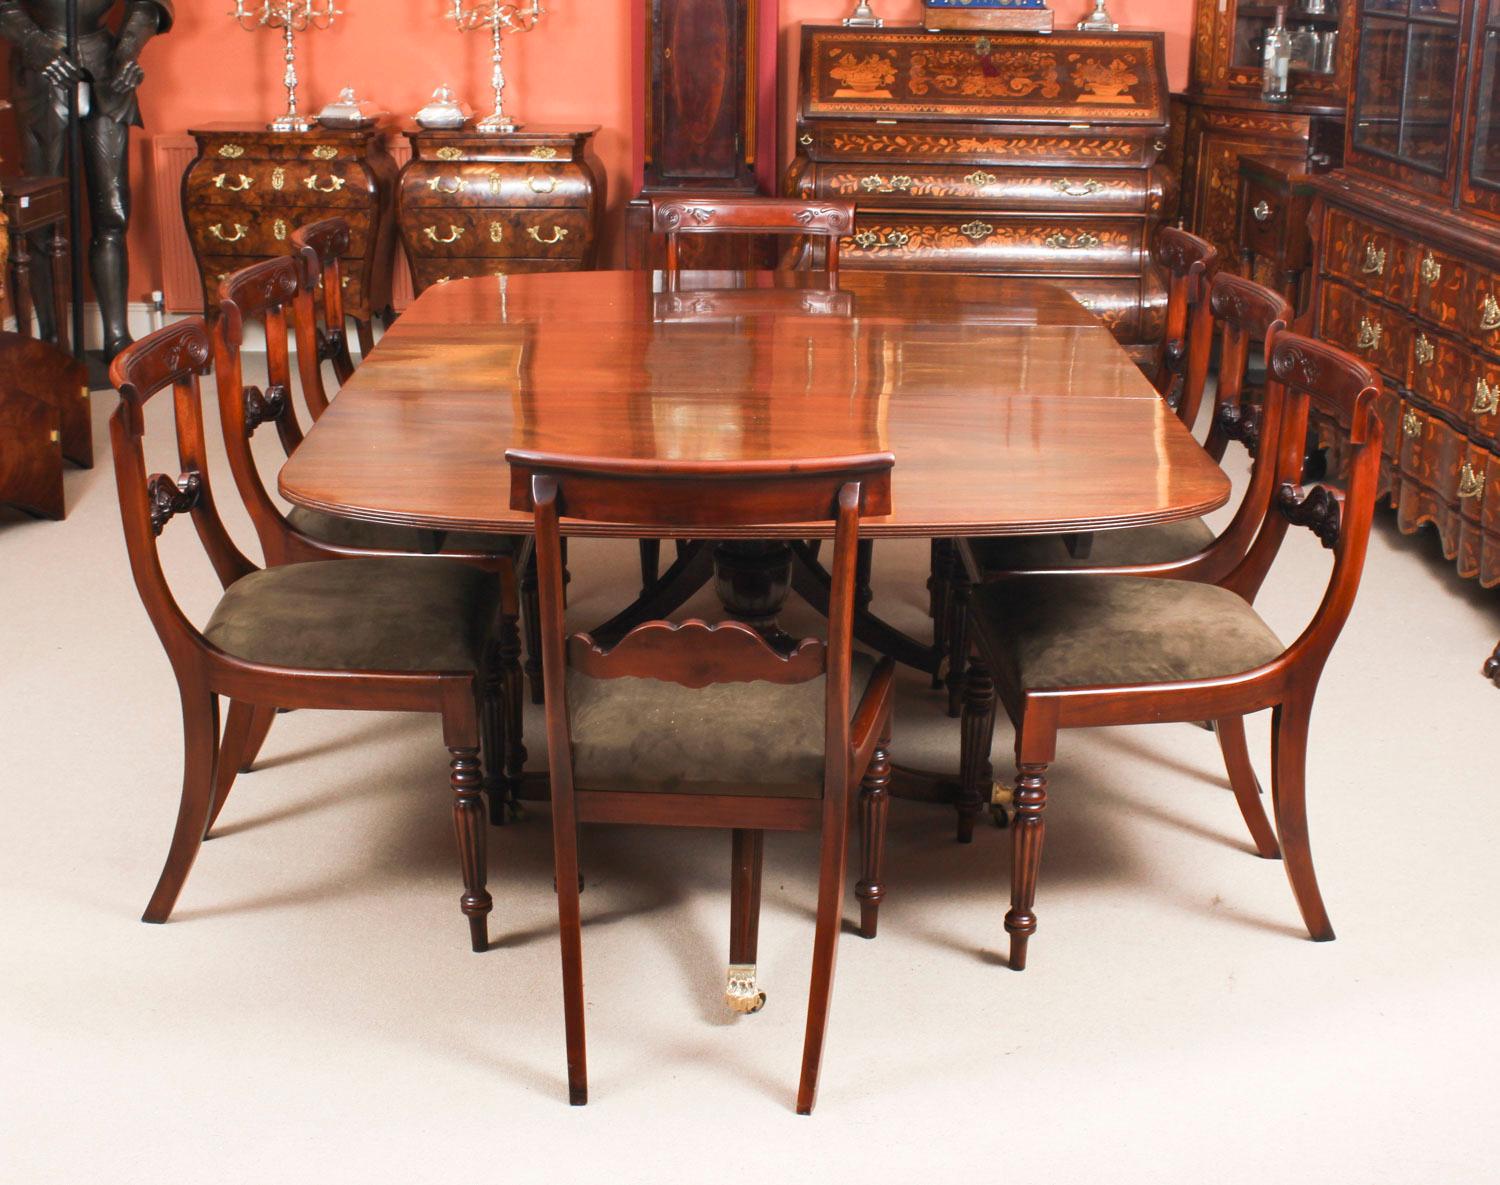 This is an elegant dining set comprising an antique George III Regency period dining table, circa 1820 in date, with a fabulous set of eight bespoke Regency style dining chairs.

The table has one additional leaf and is raised on twin 